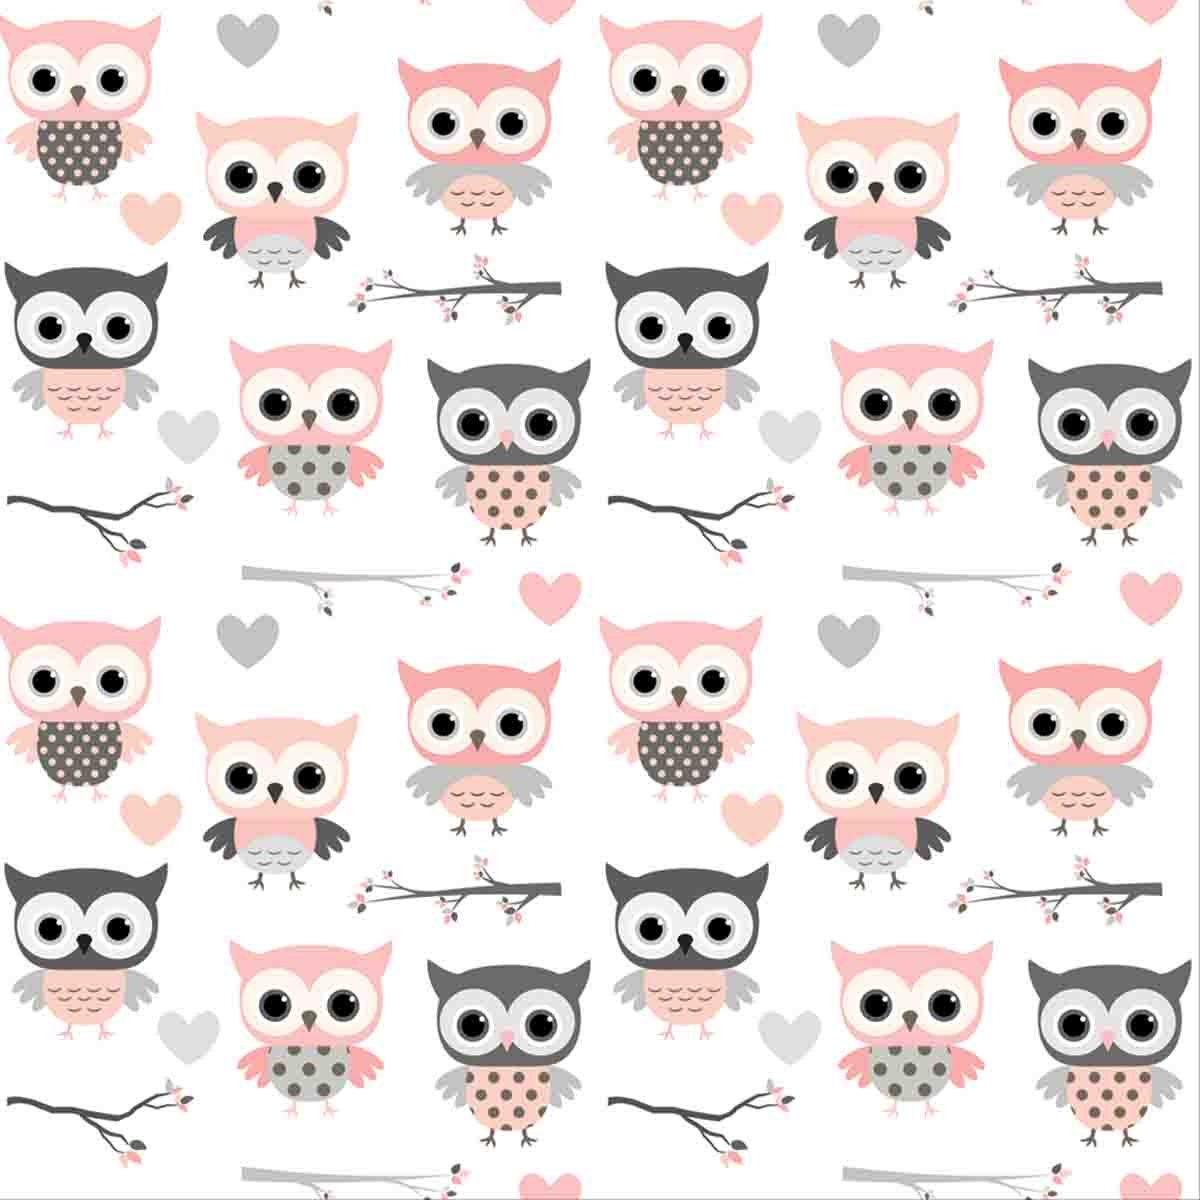 Cute Pattern with Cartoon Owls, Hearts and Branches in Pink and Grey Colors Wallpaper Girl Nursery Mural